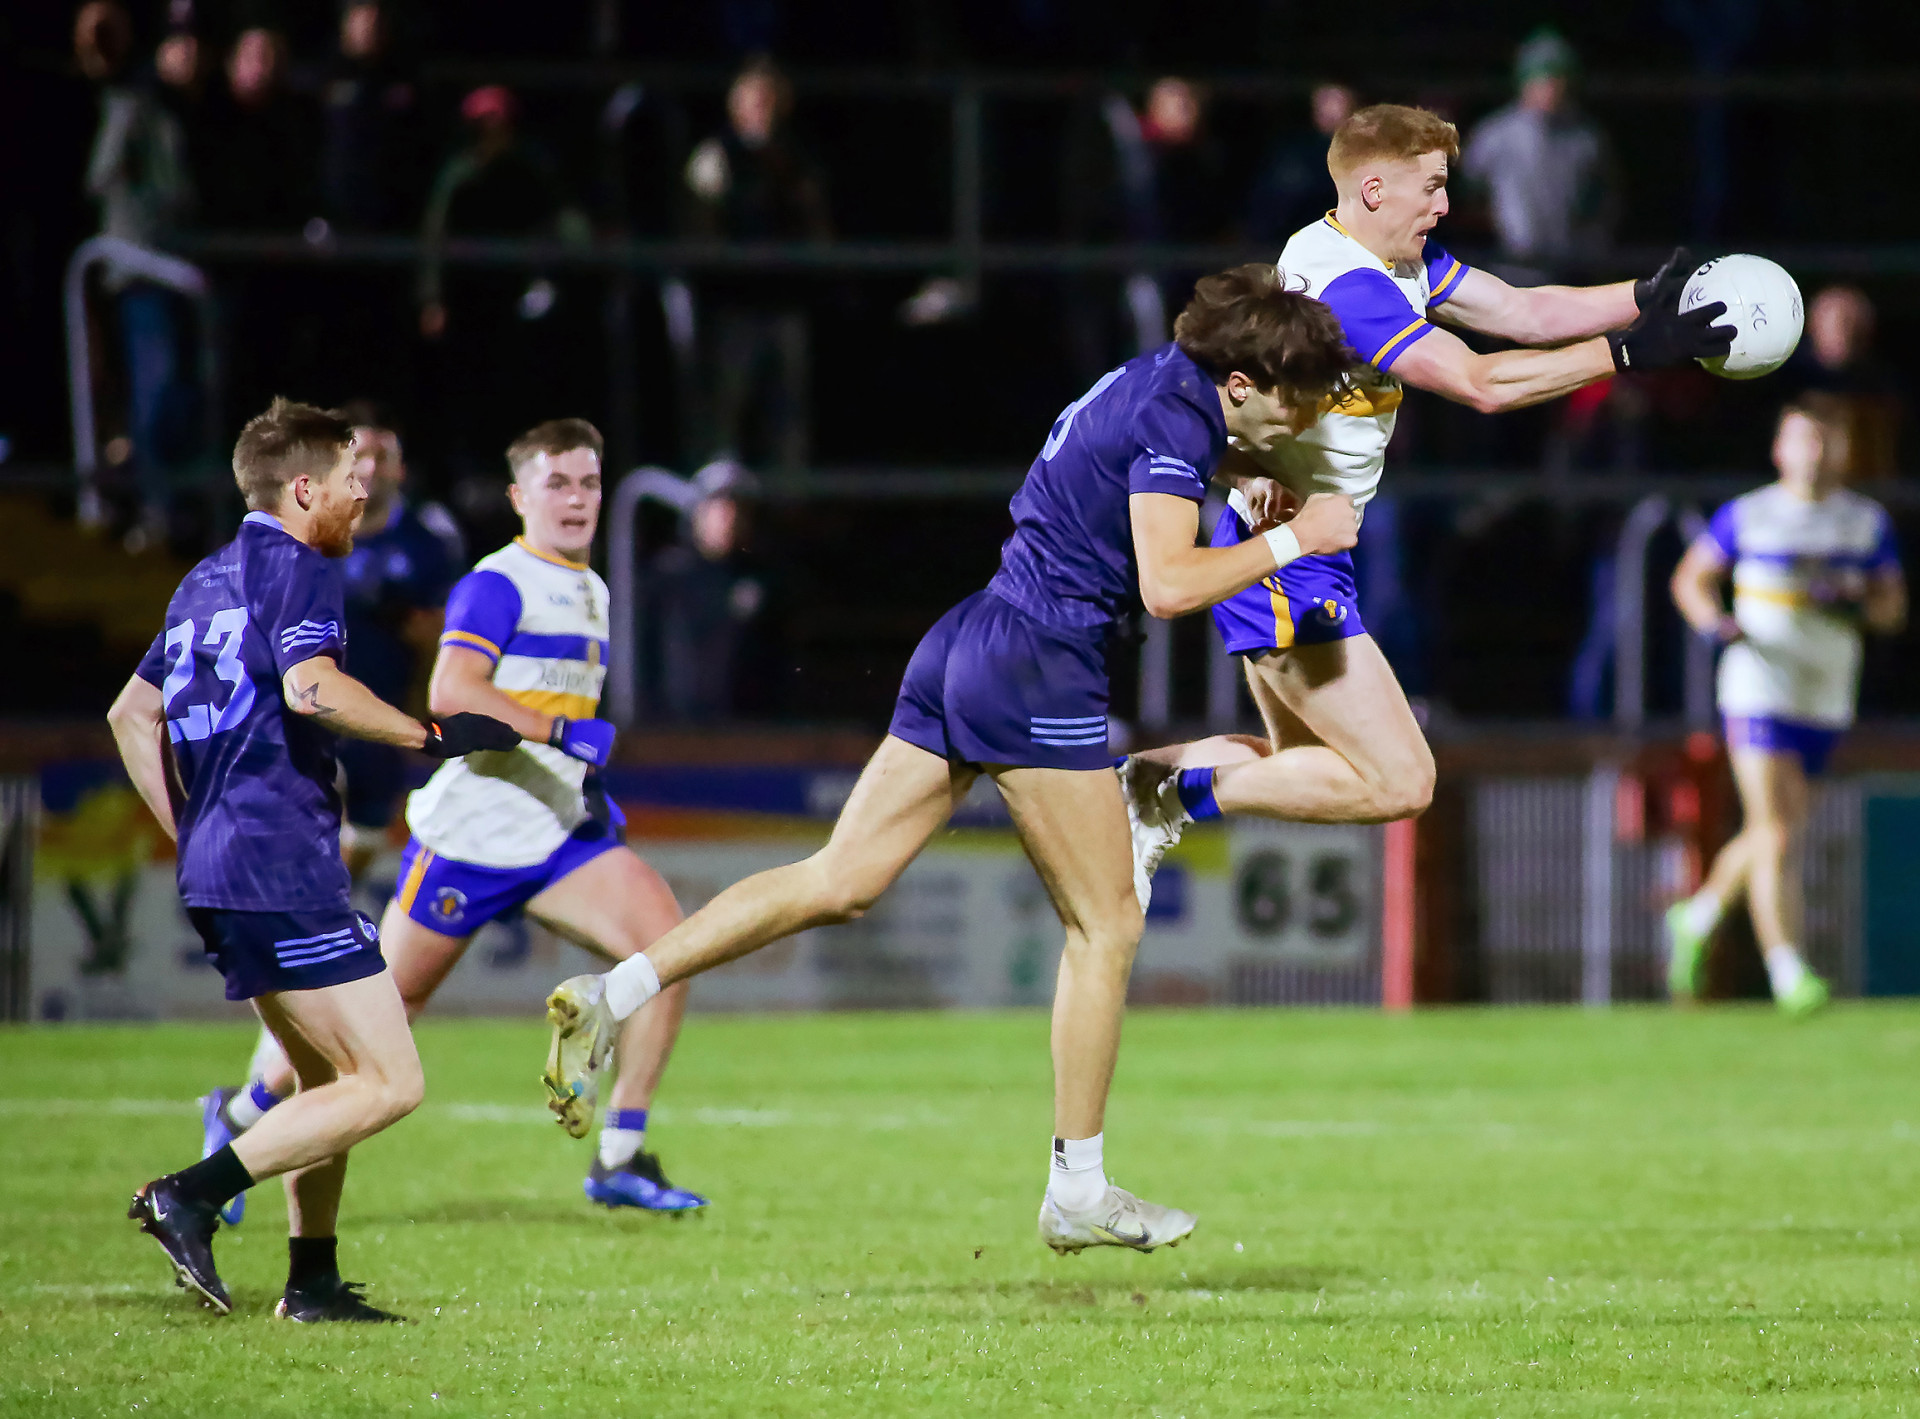 Holders Errigal quell Killyclogher fightback